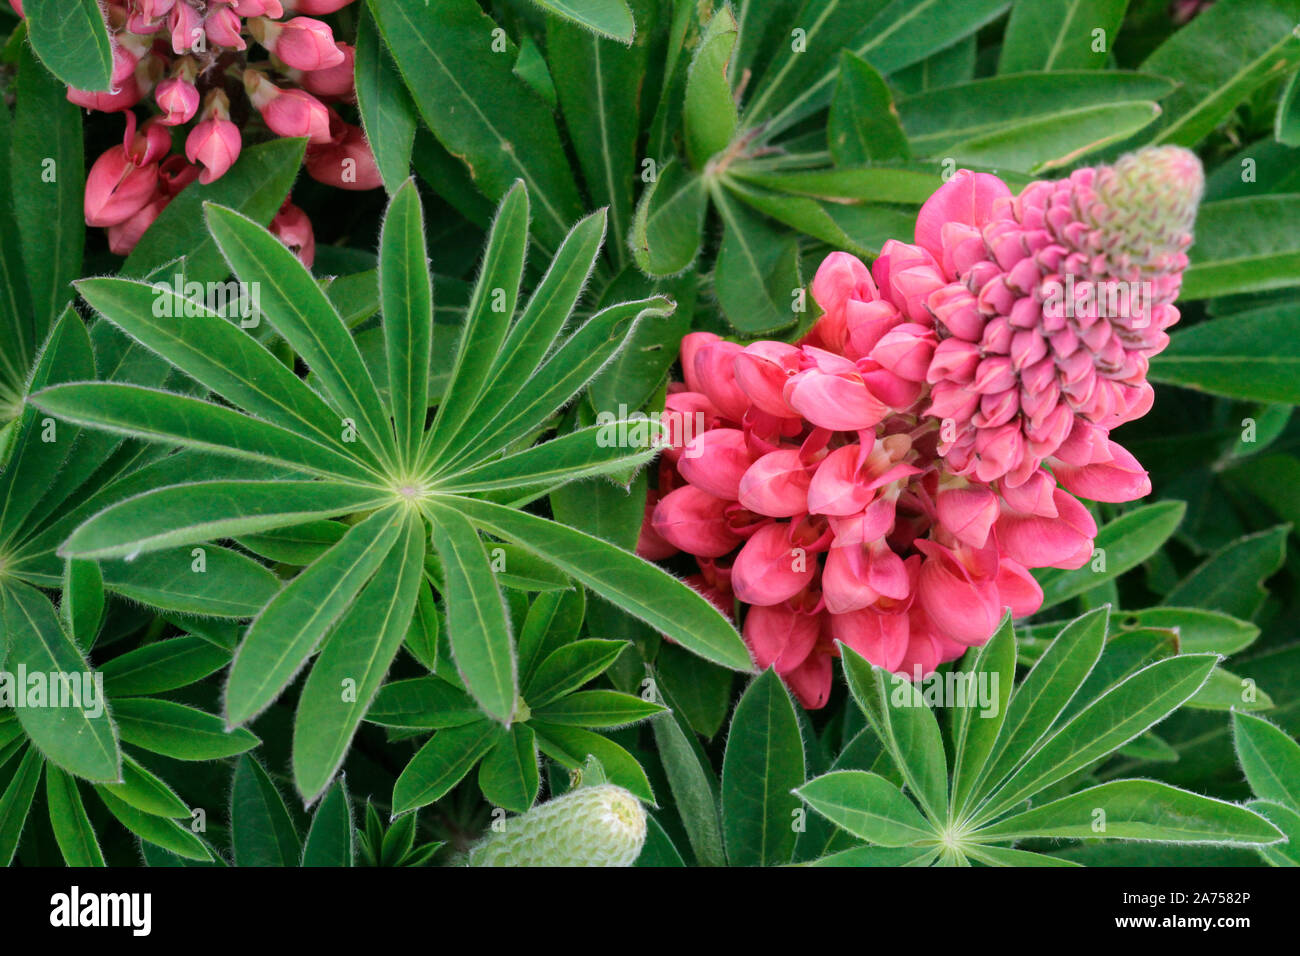 Inflorescence and foliage of horticultural Marsh lupine (Lupinus polyphyllus), Rospez, Brittany, France Stock Photo